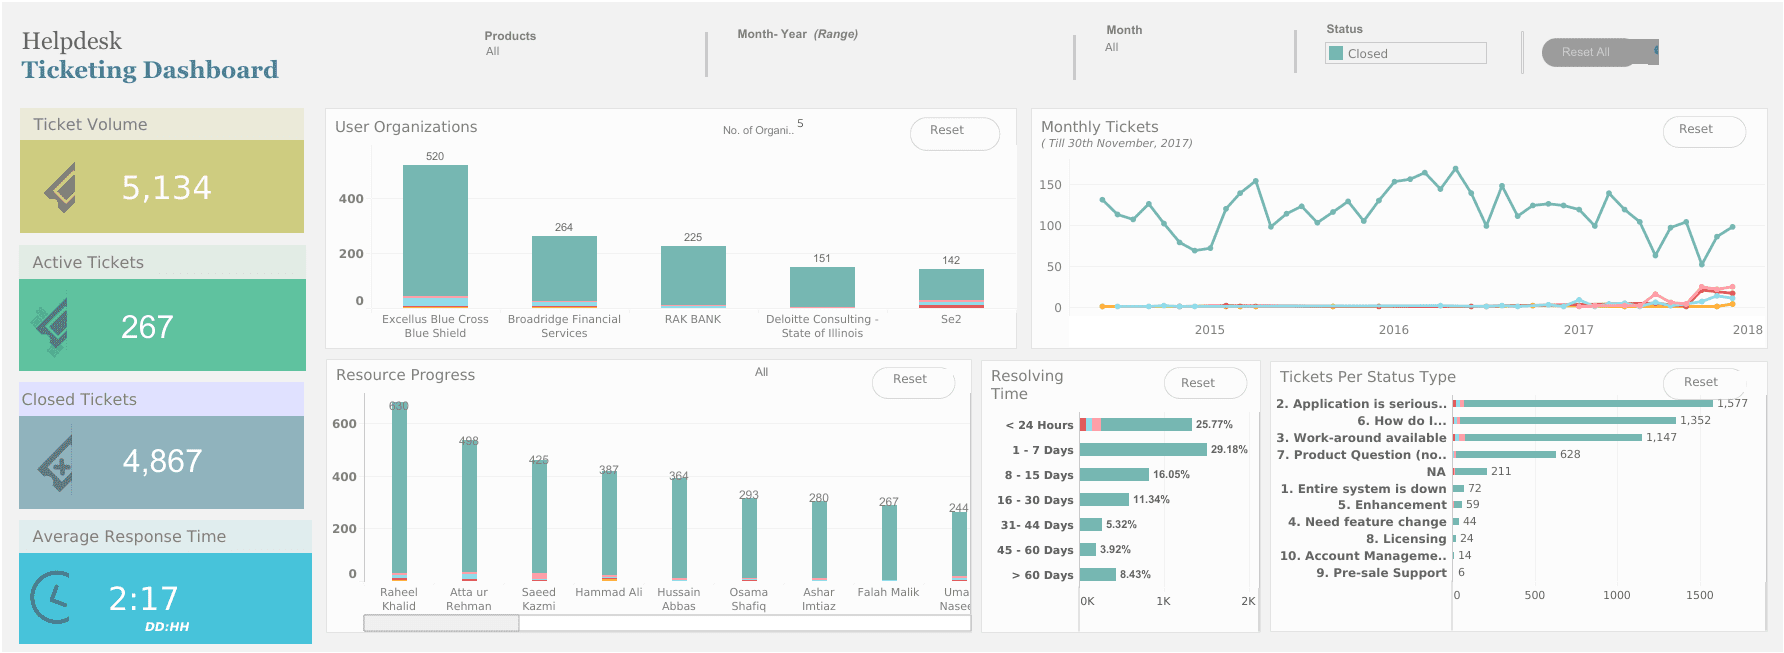 Tableau Inventory Dashboard Example